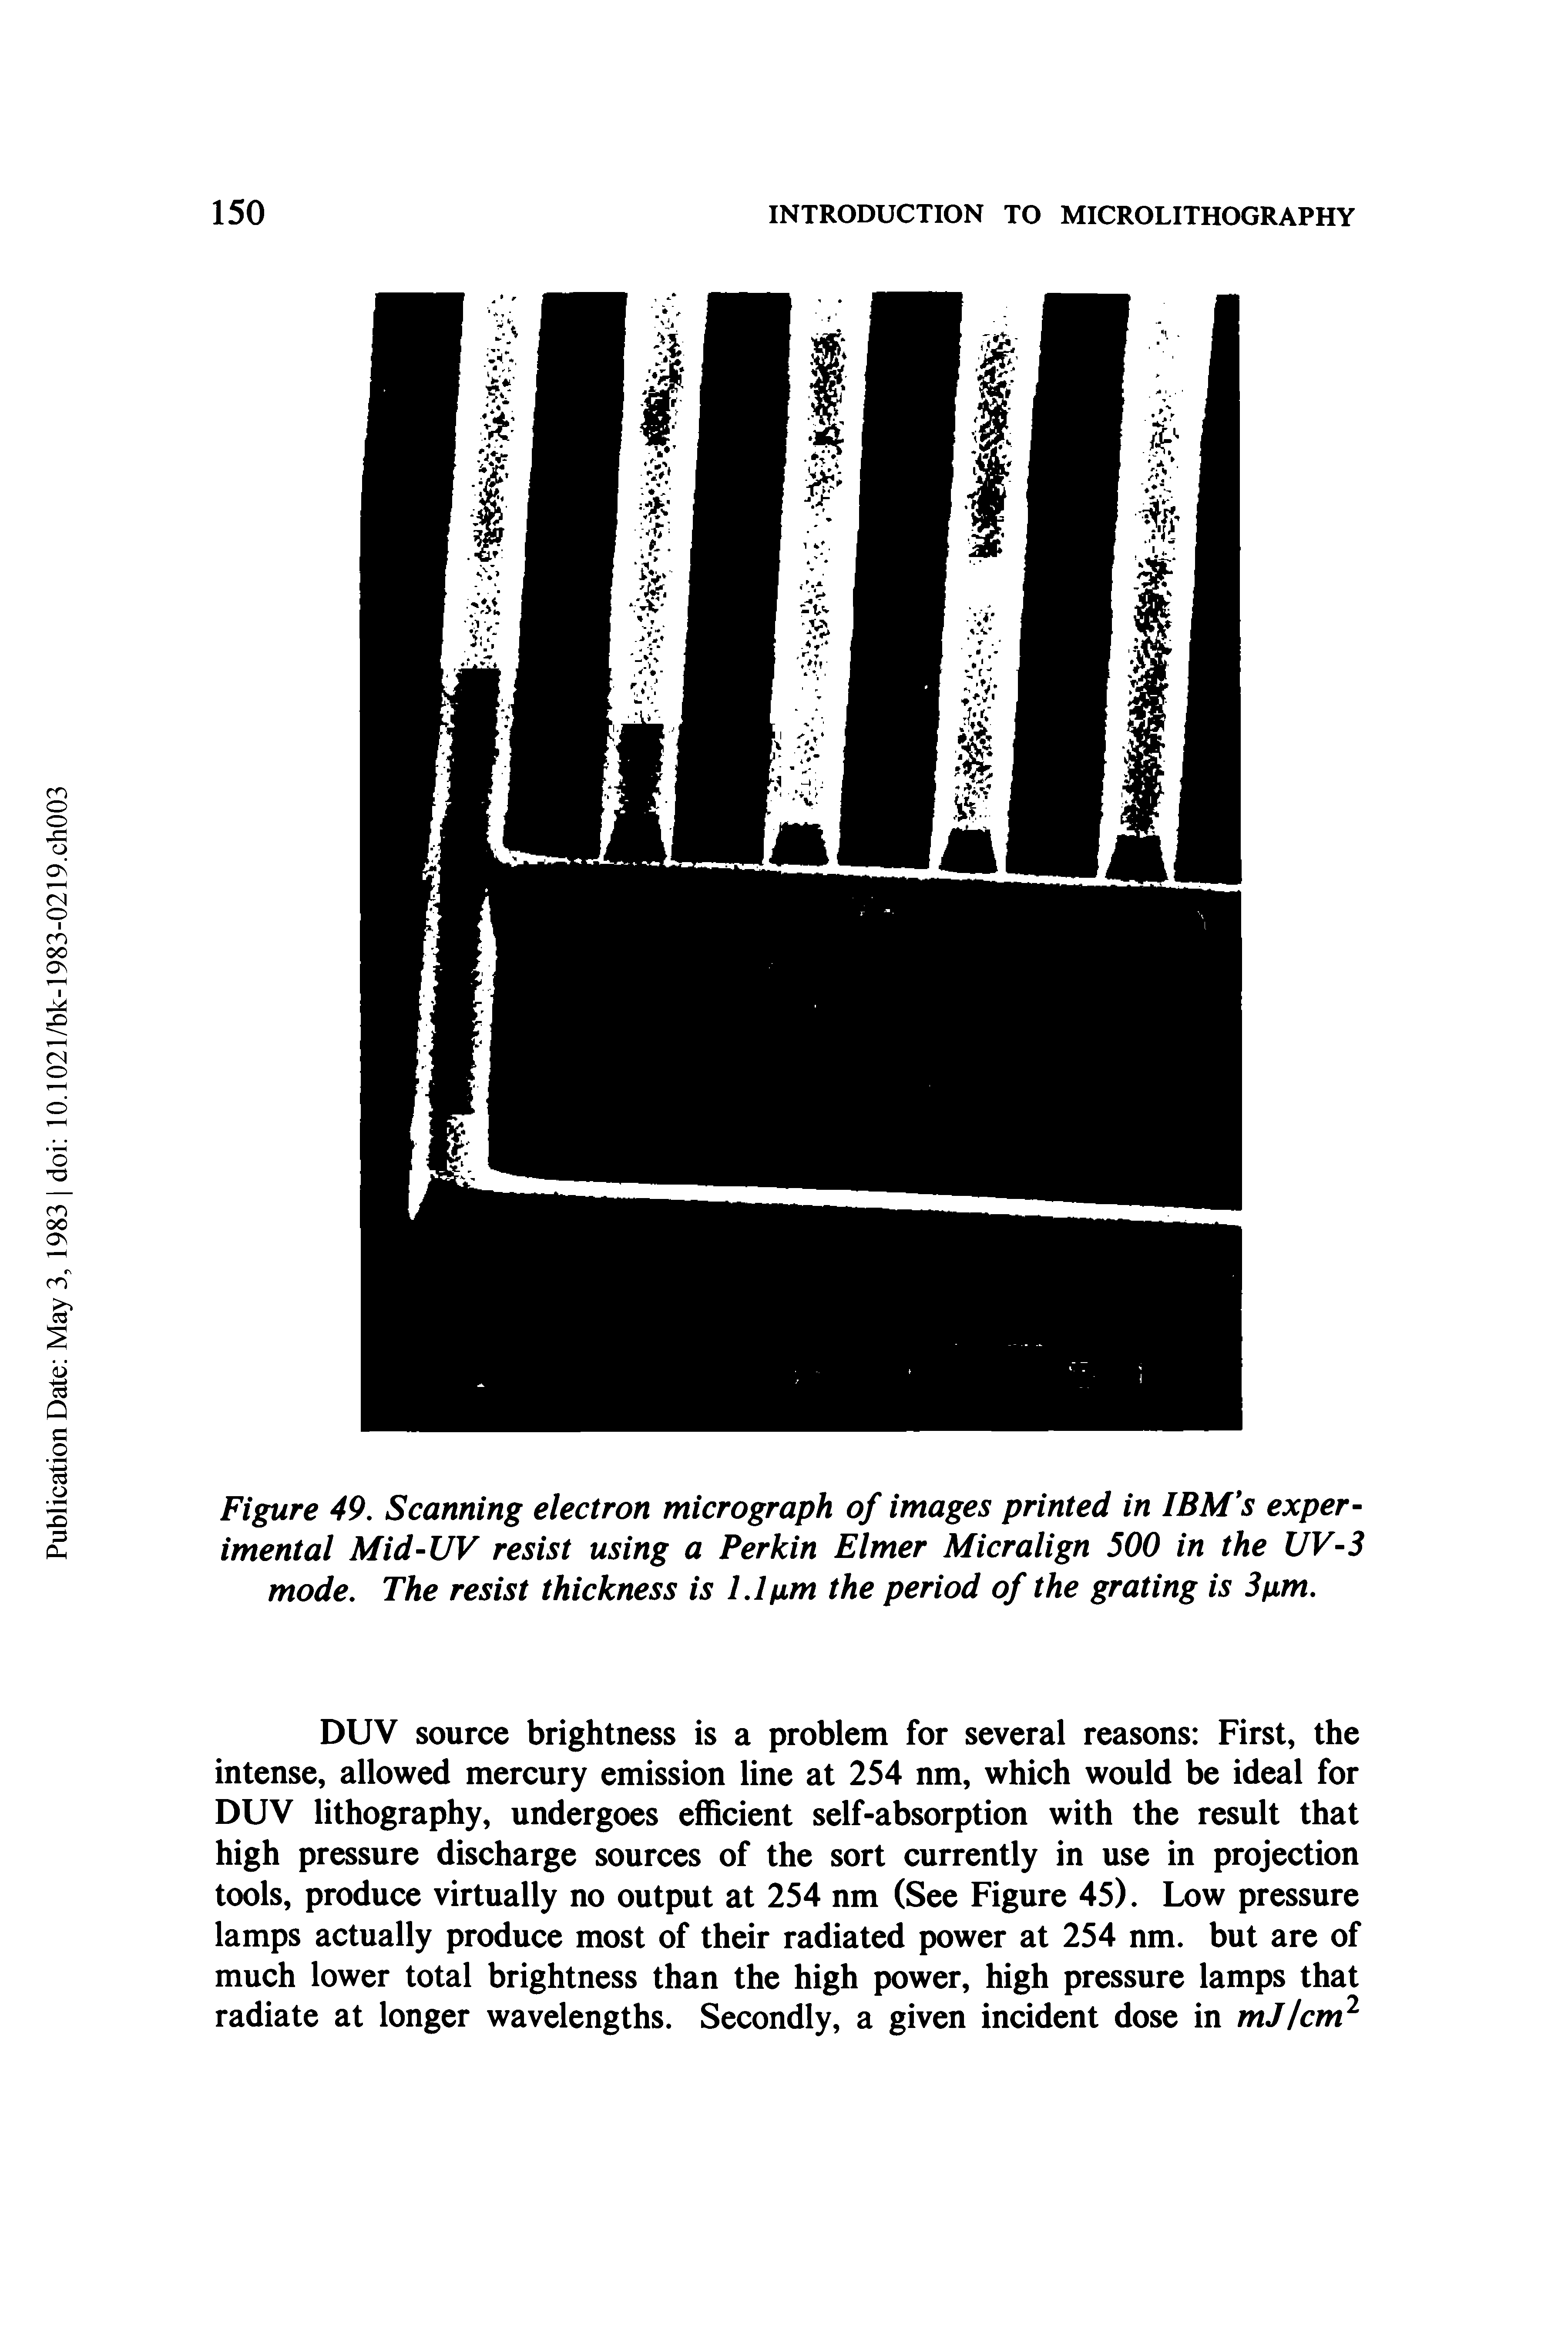 Figure 49. Scanning electron micrograph of images printed in IBM s experimental Mid-UV resist using a Perkin Elmer Micralign 500 in the UV-3 mode. The resist thickness is 1.1 fim the period of the grating is Sum.